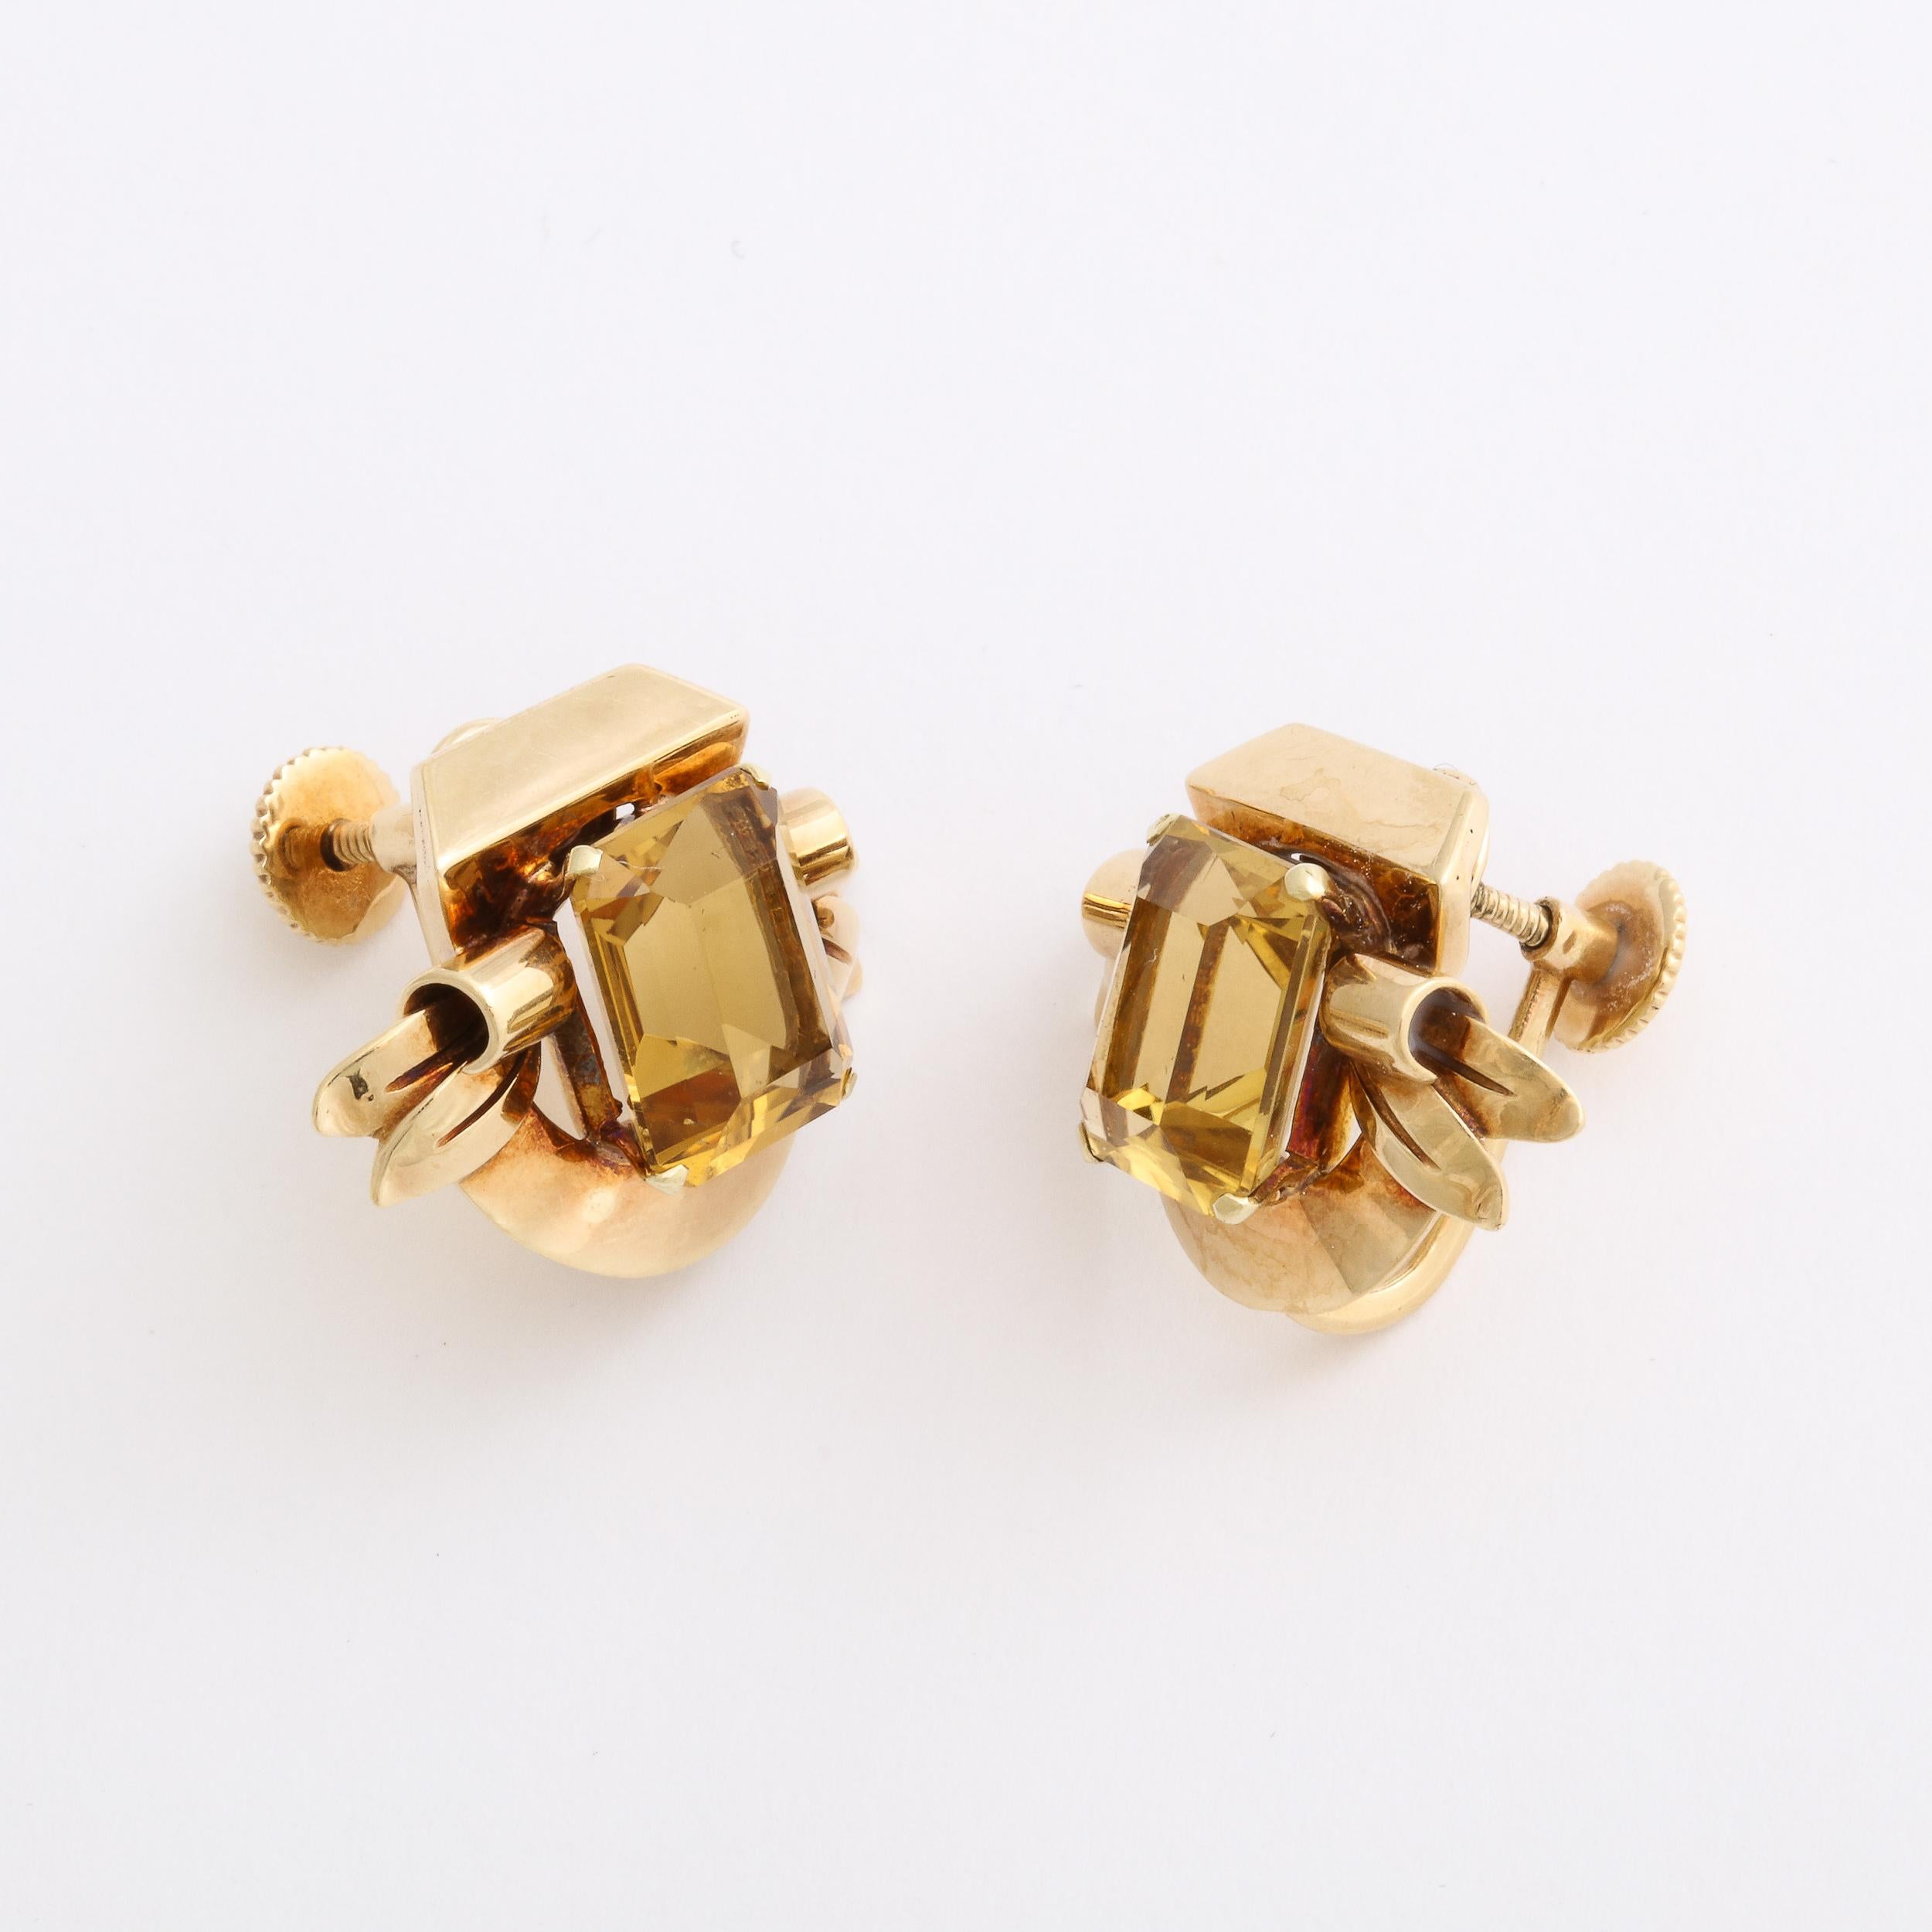 These Art Deco Retro 14ct. Yellow Gold & Citrine Earrings Signed Cartier originate from France, Circa 1935. They feature stepped Emerald Cut Citrines nested in four pronged attachments accented with a sophisticated combination of geometric and